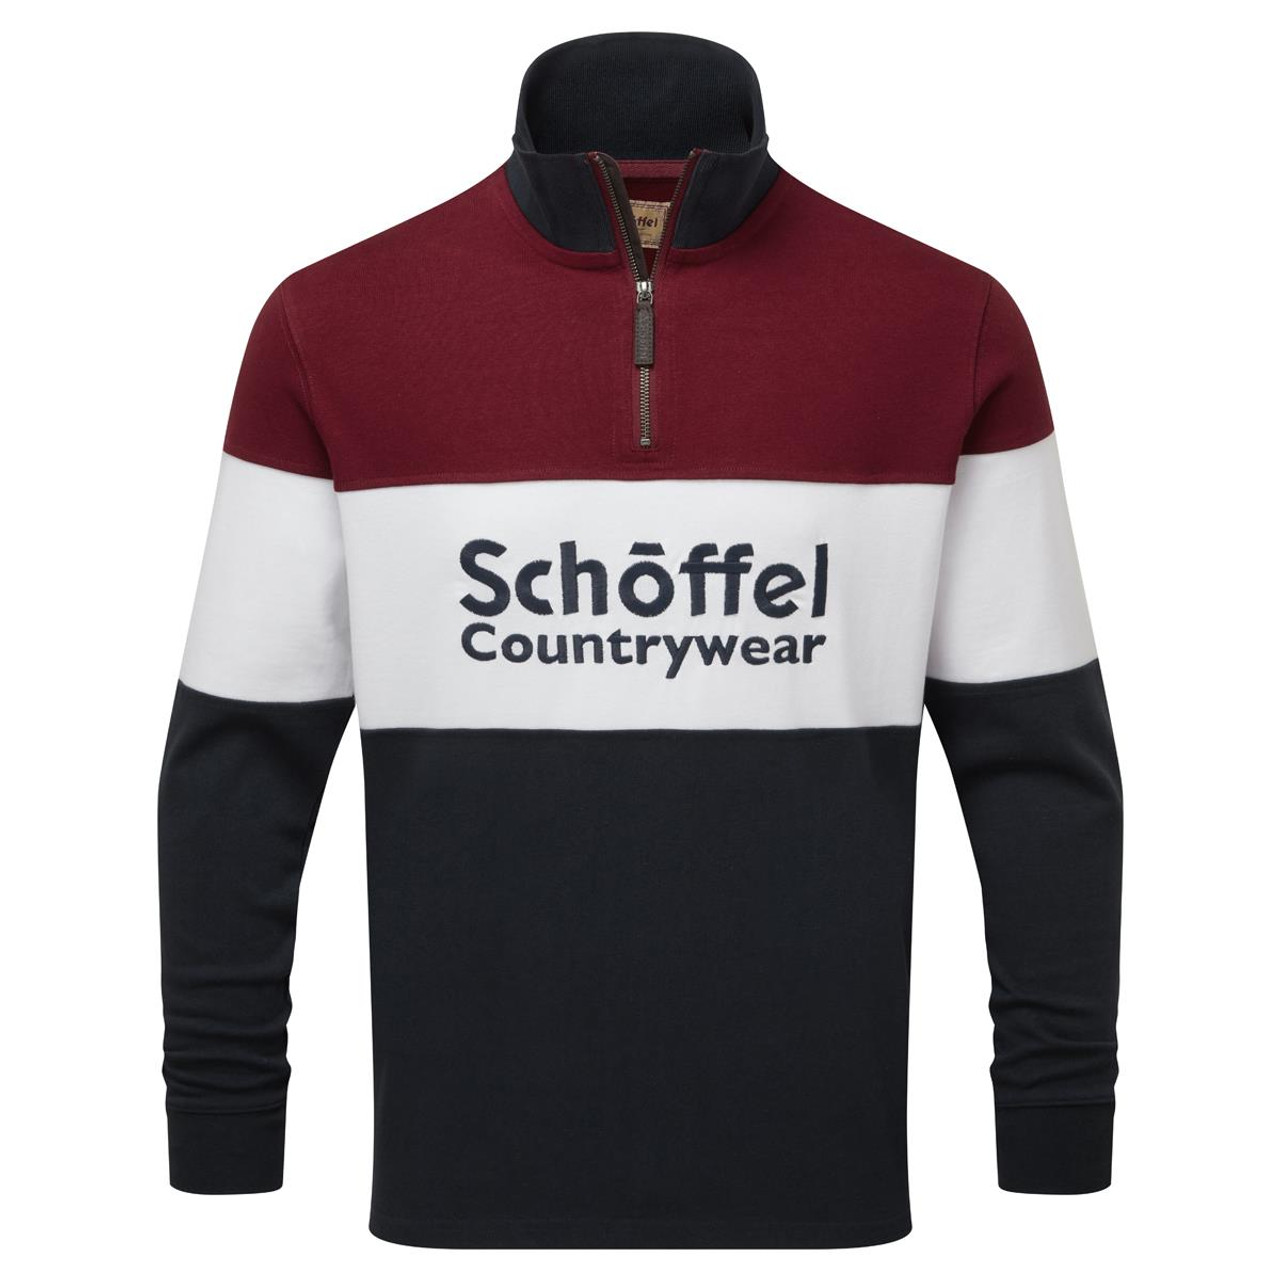 What is Schoffel Exeter's key selling point?